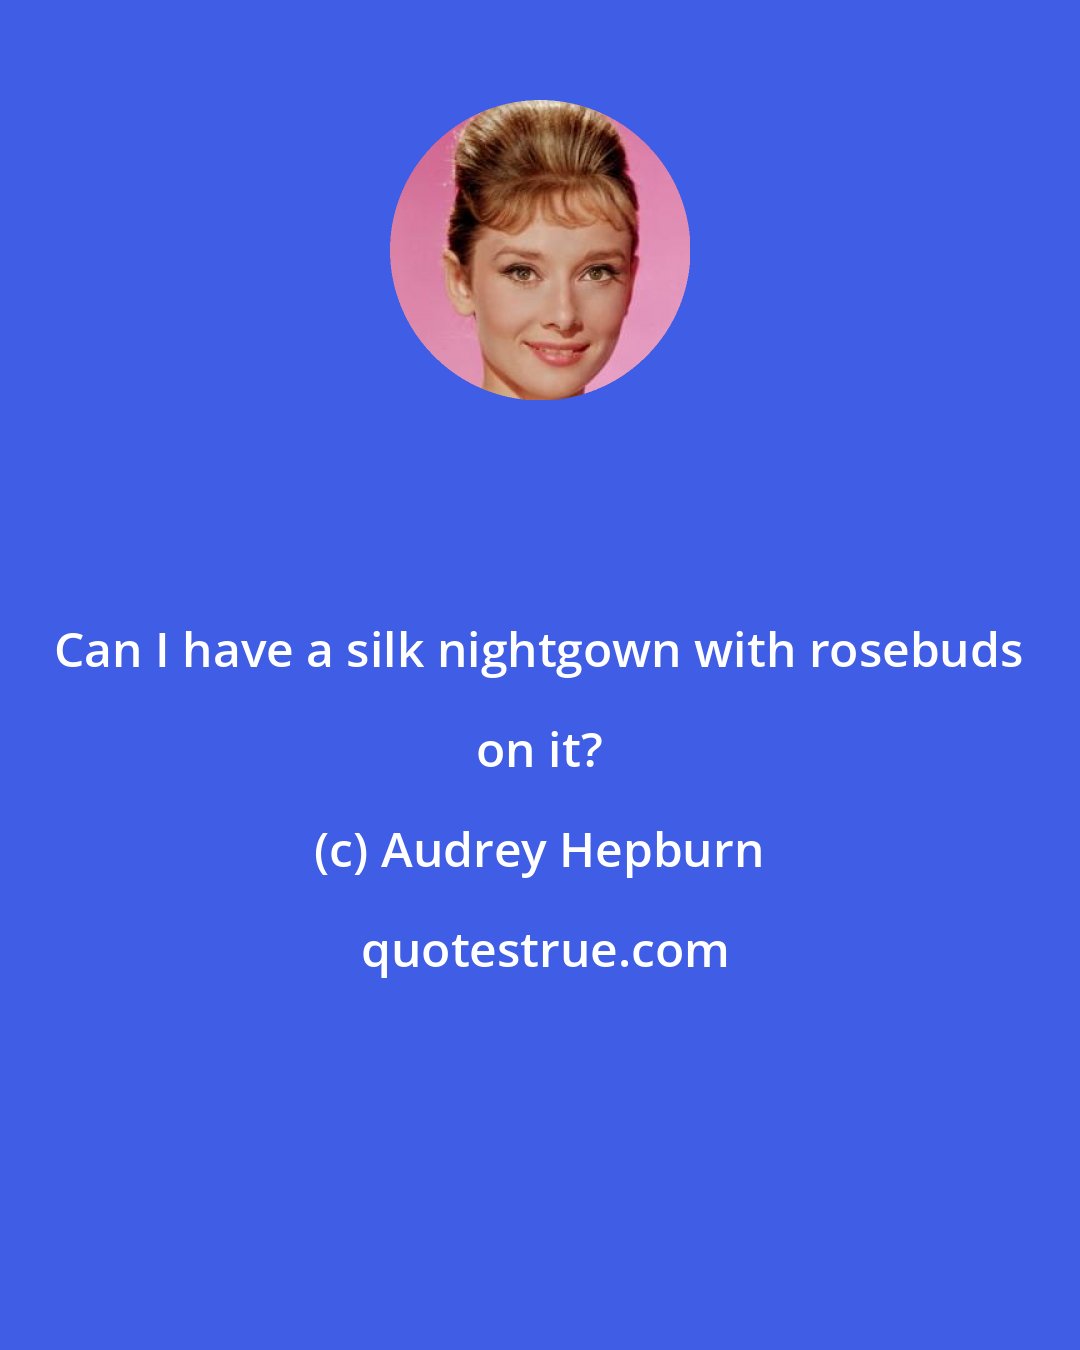 Audrey Hepburn: Can I have a silk nightgown with rosebuds on it?